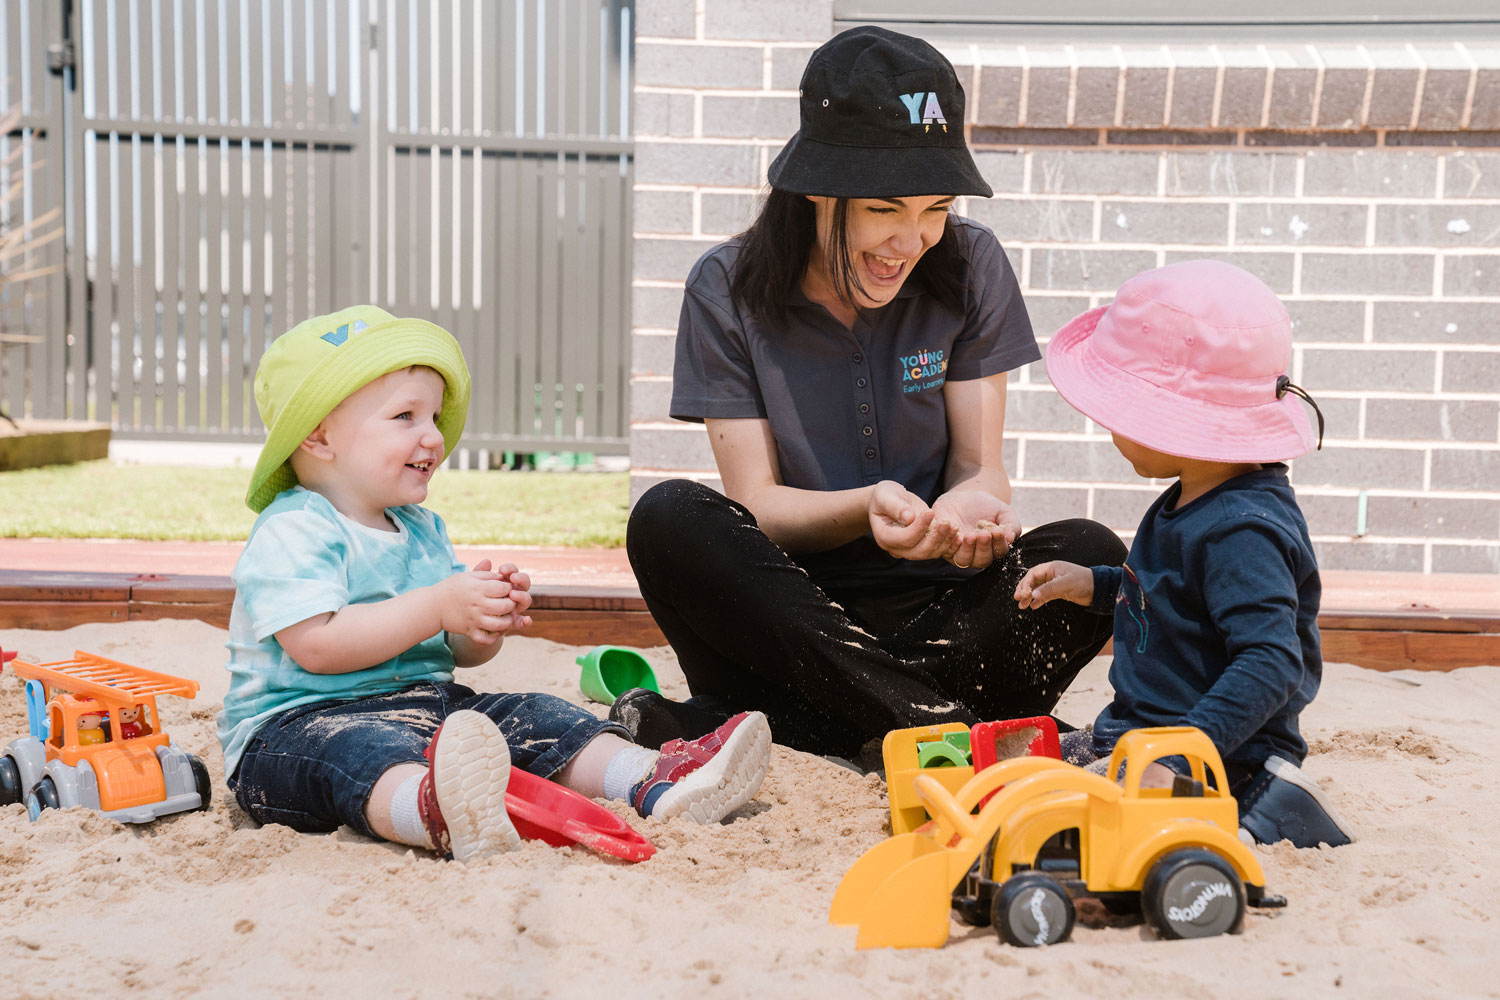 long day care centres sydney